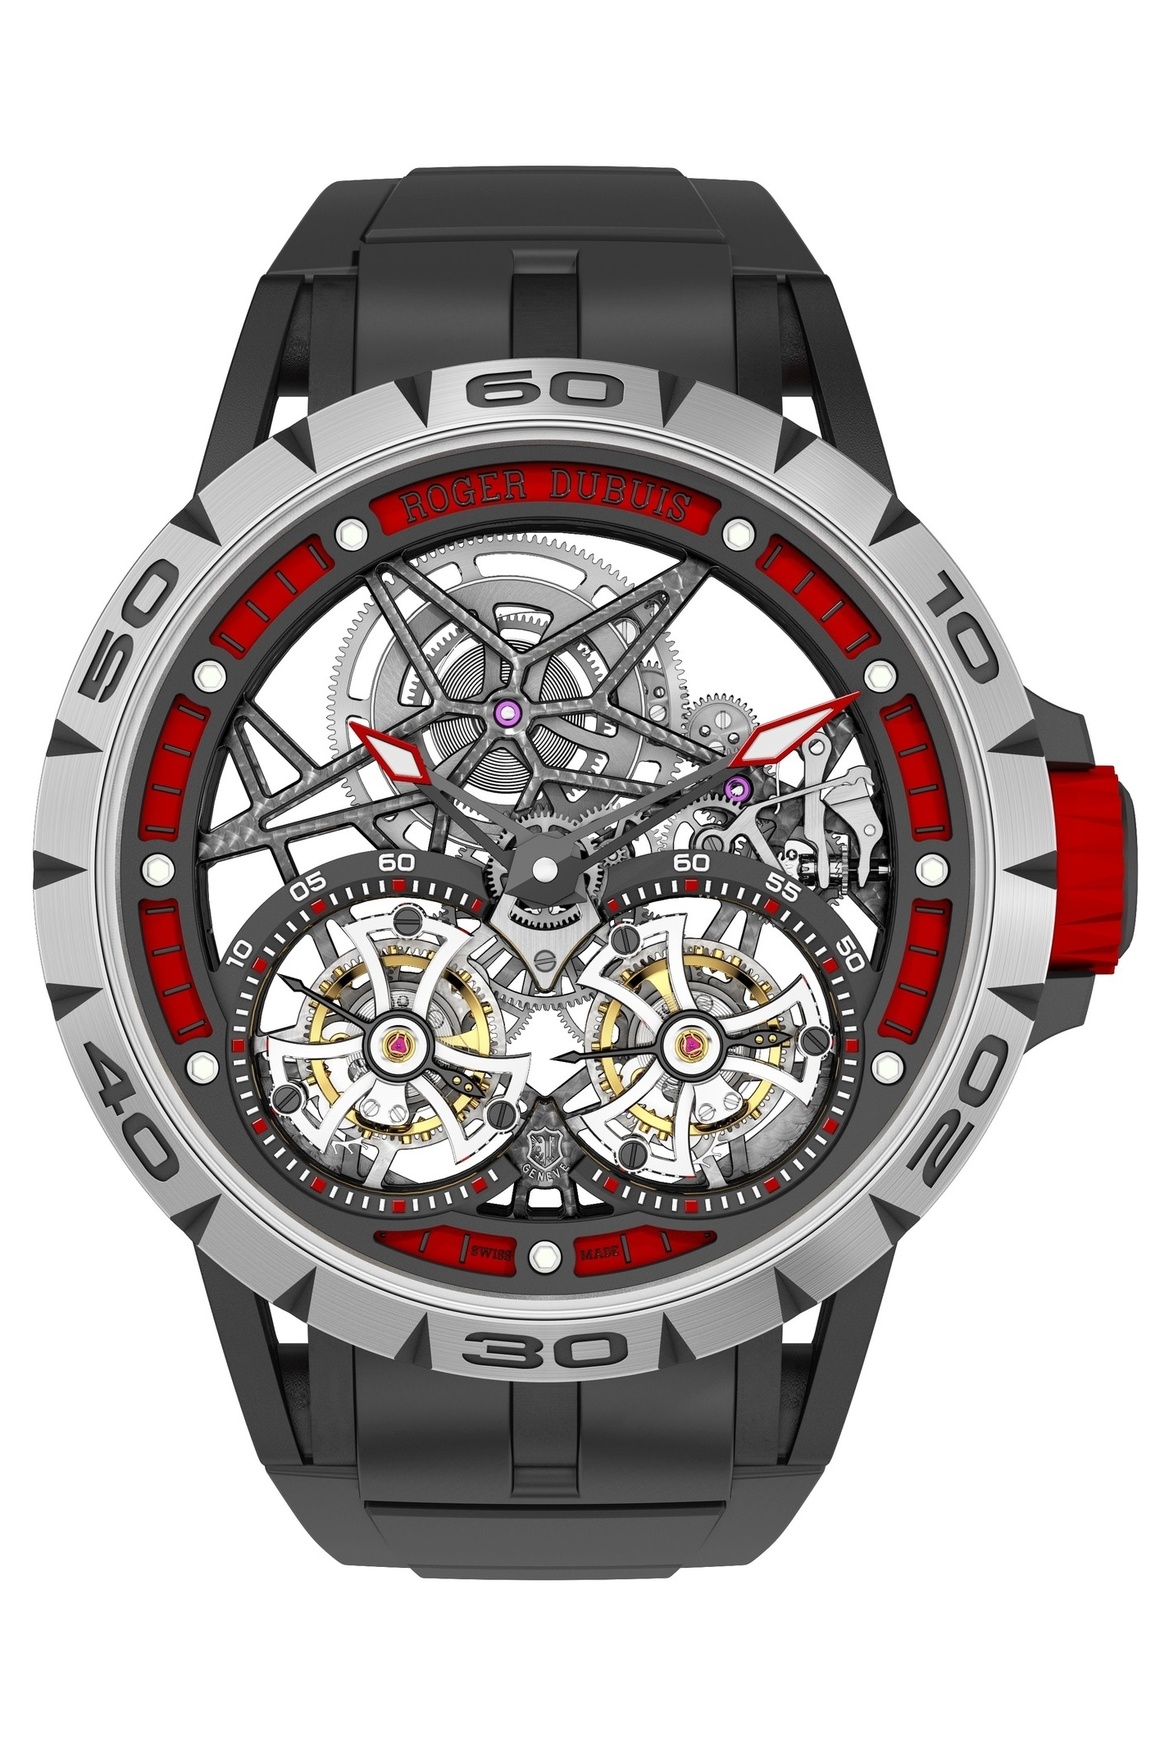 Roger Dubuis watches